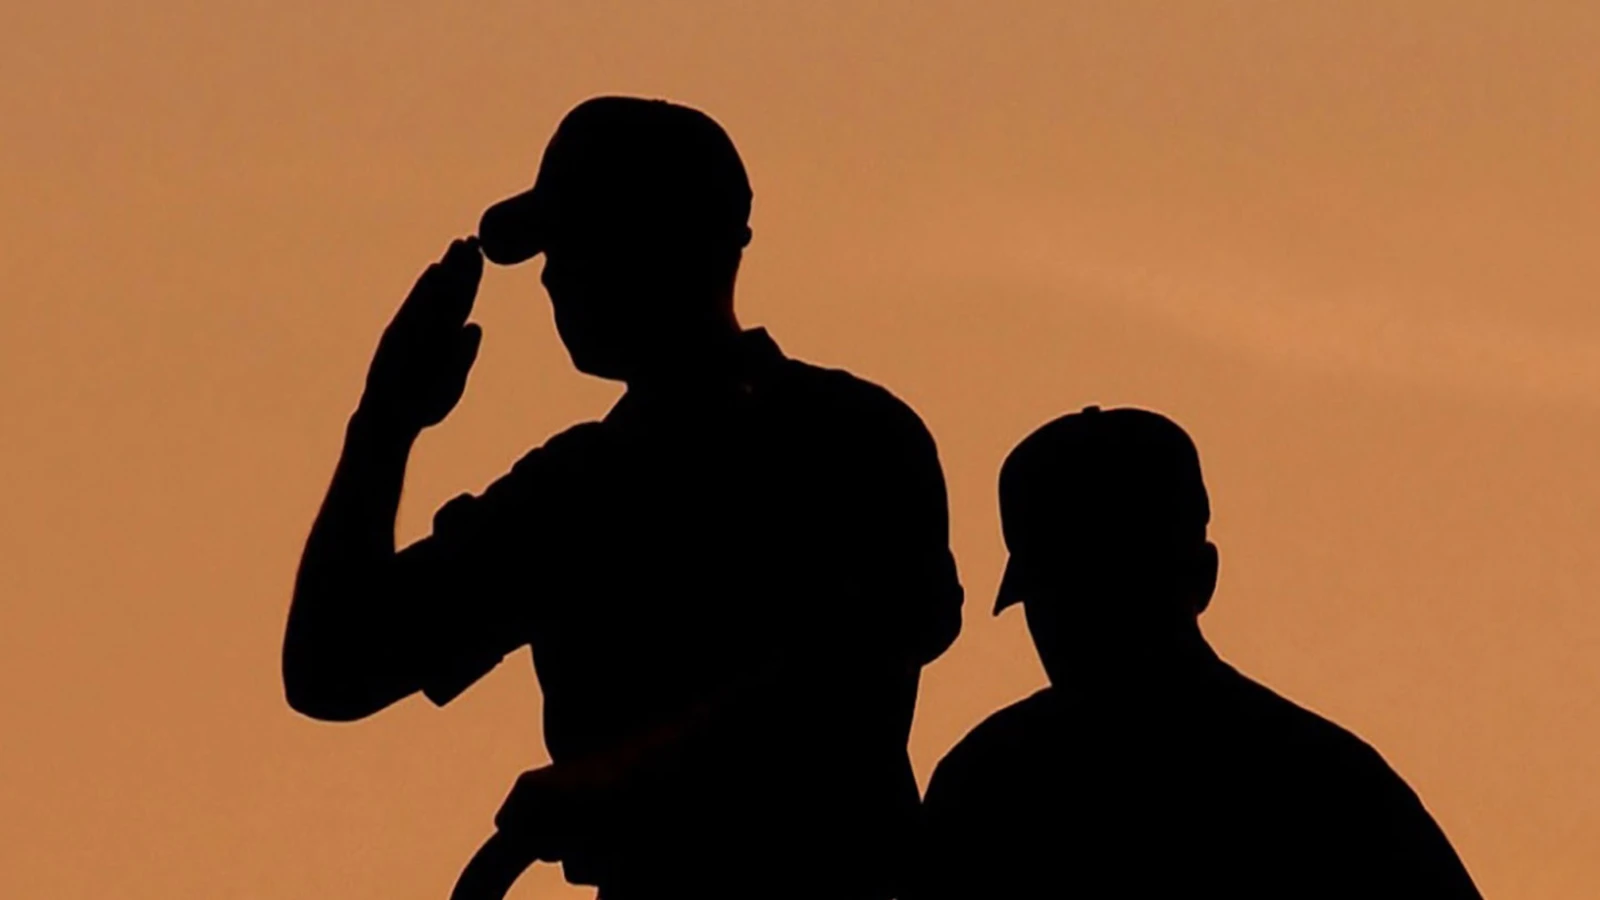 Silouette of military people, with one saluting.